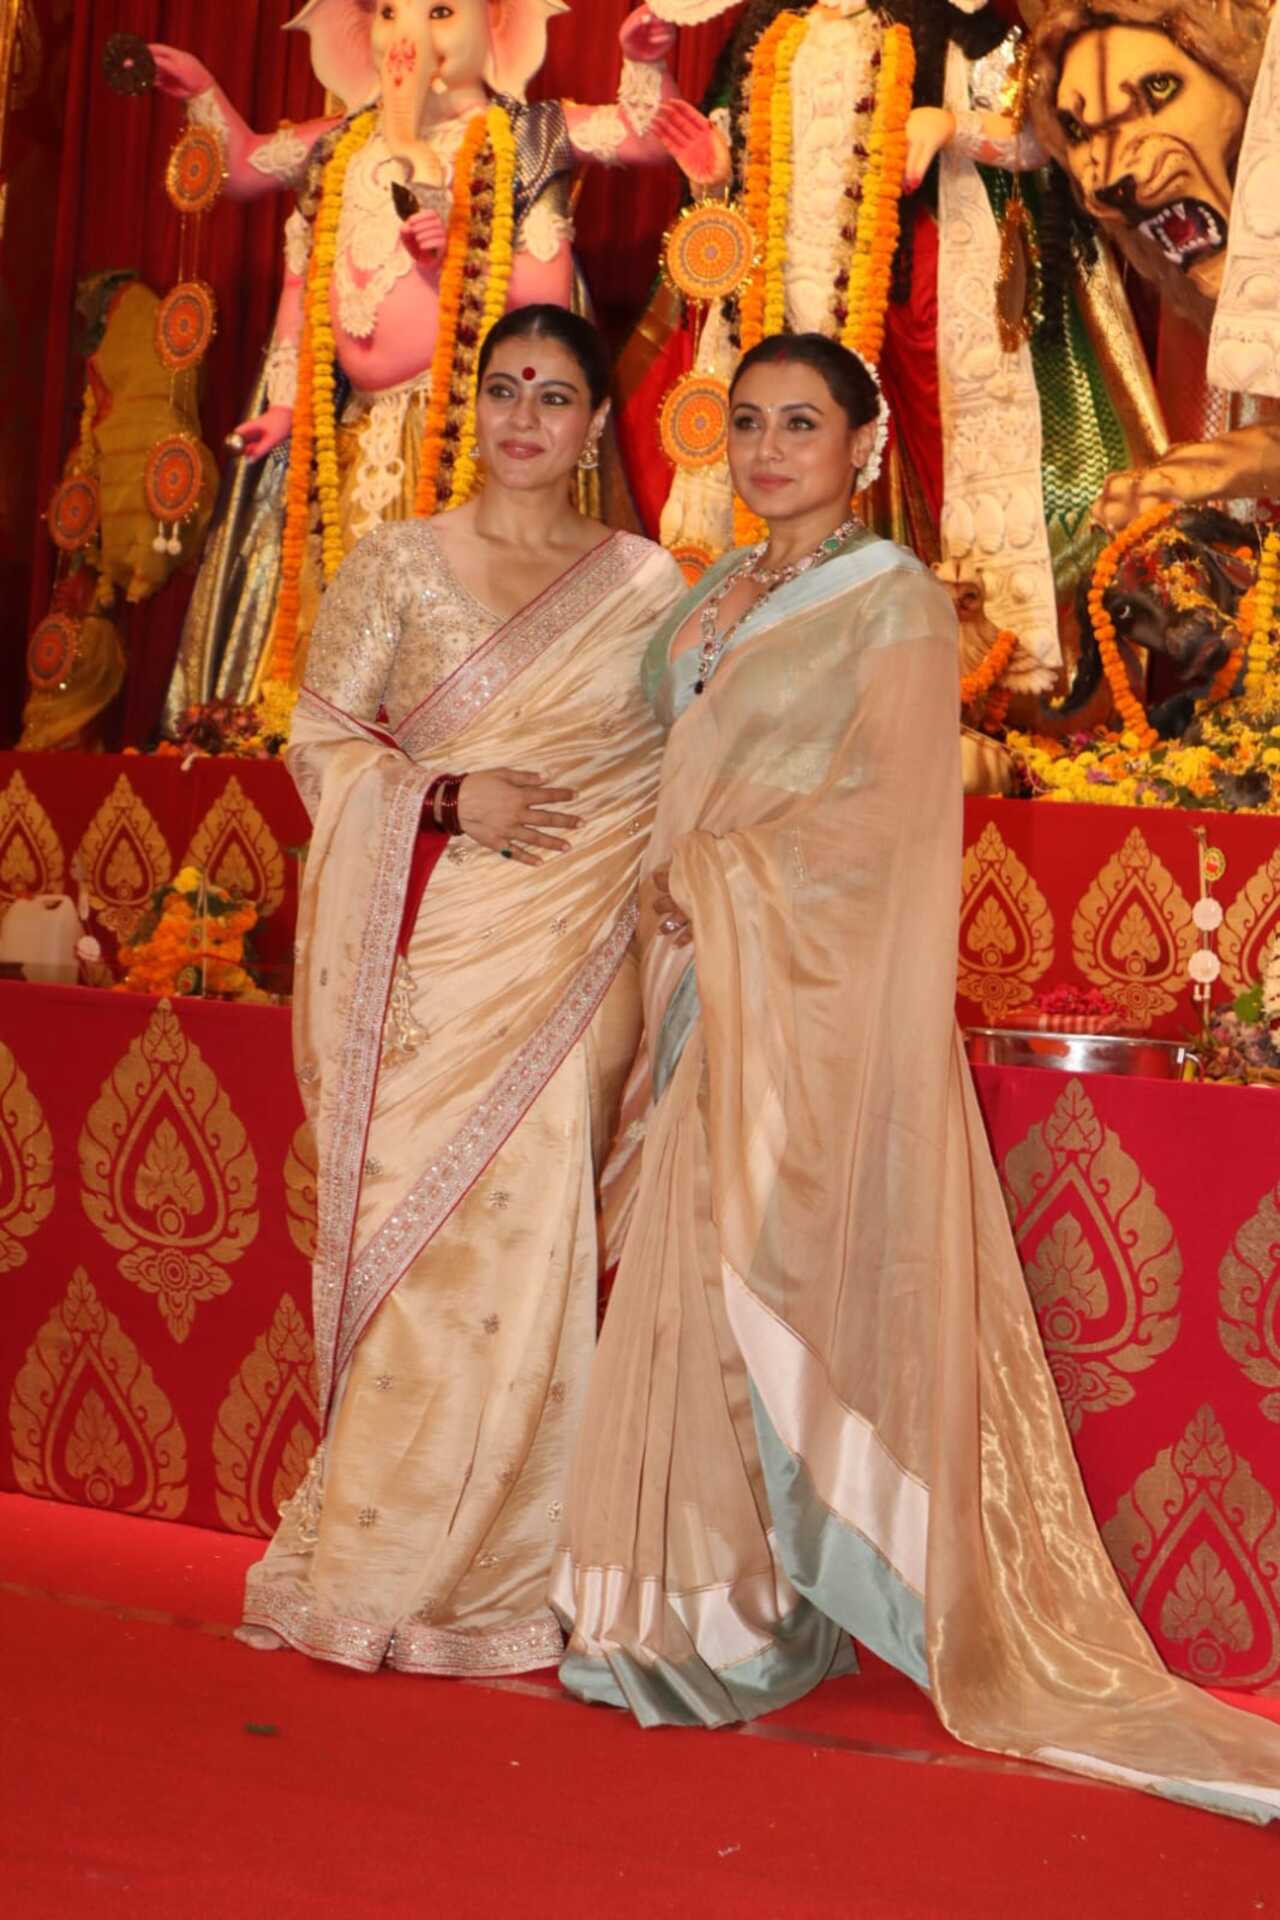 Kajol and Rani posed for pictures